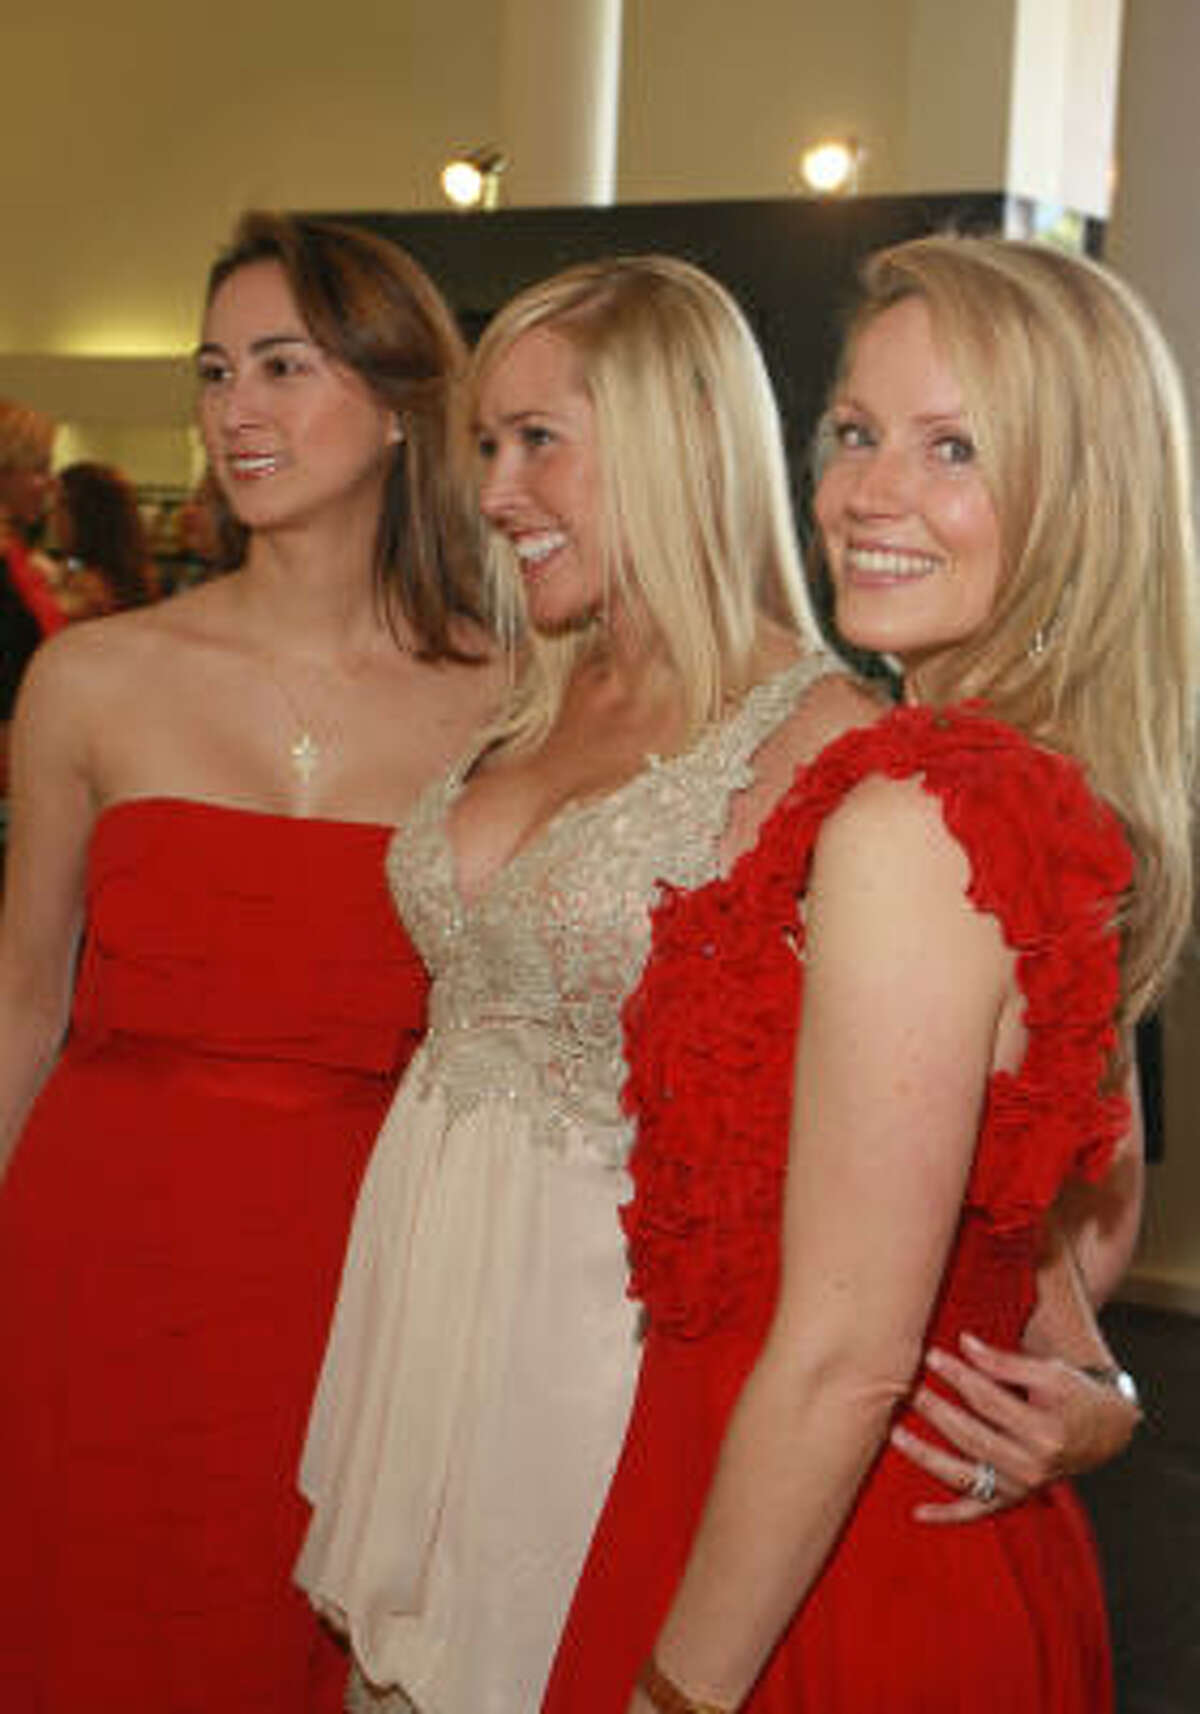 Models Shelley Smith, from left, Nancy Mathe' and Melissa King